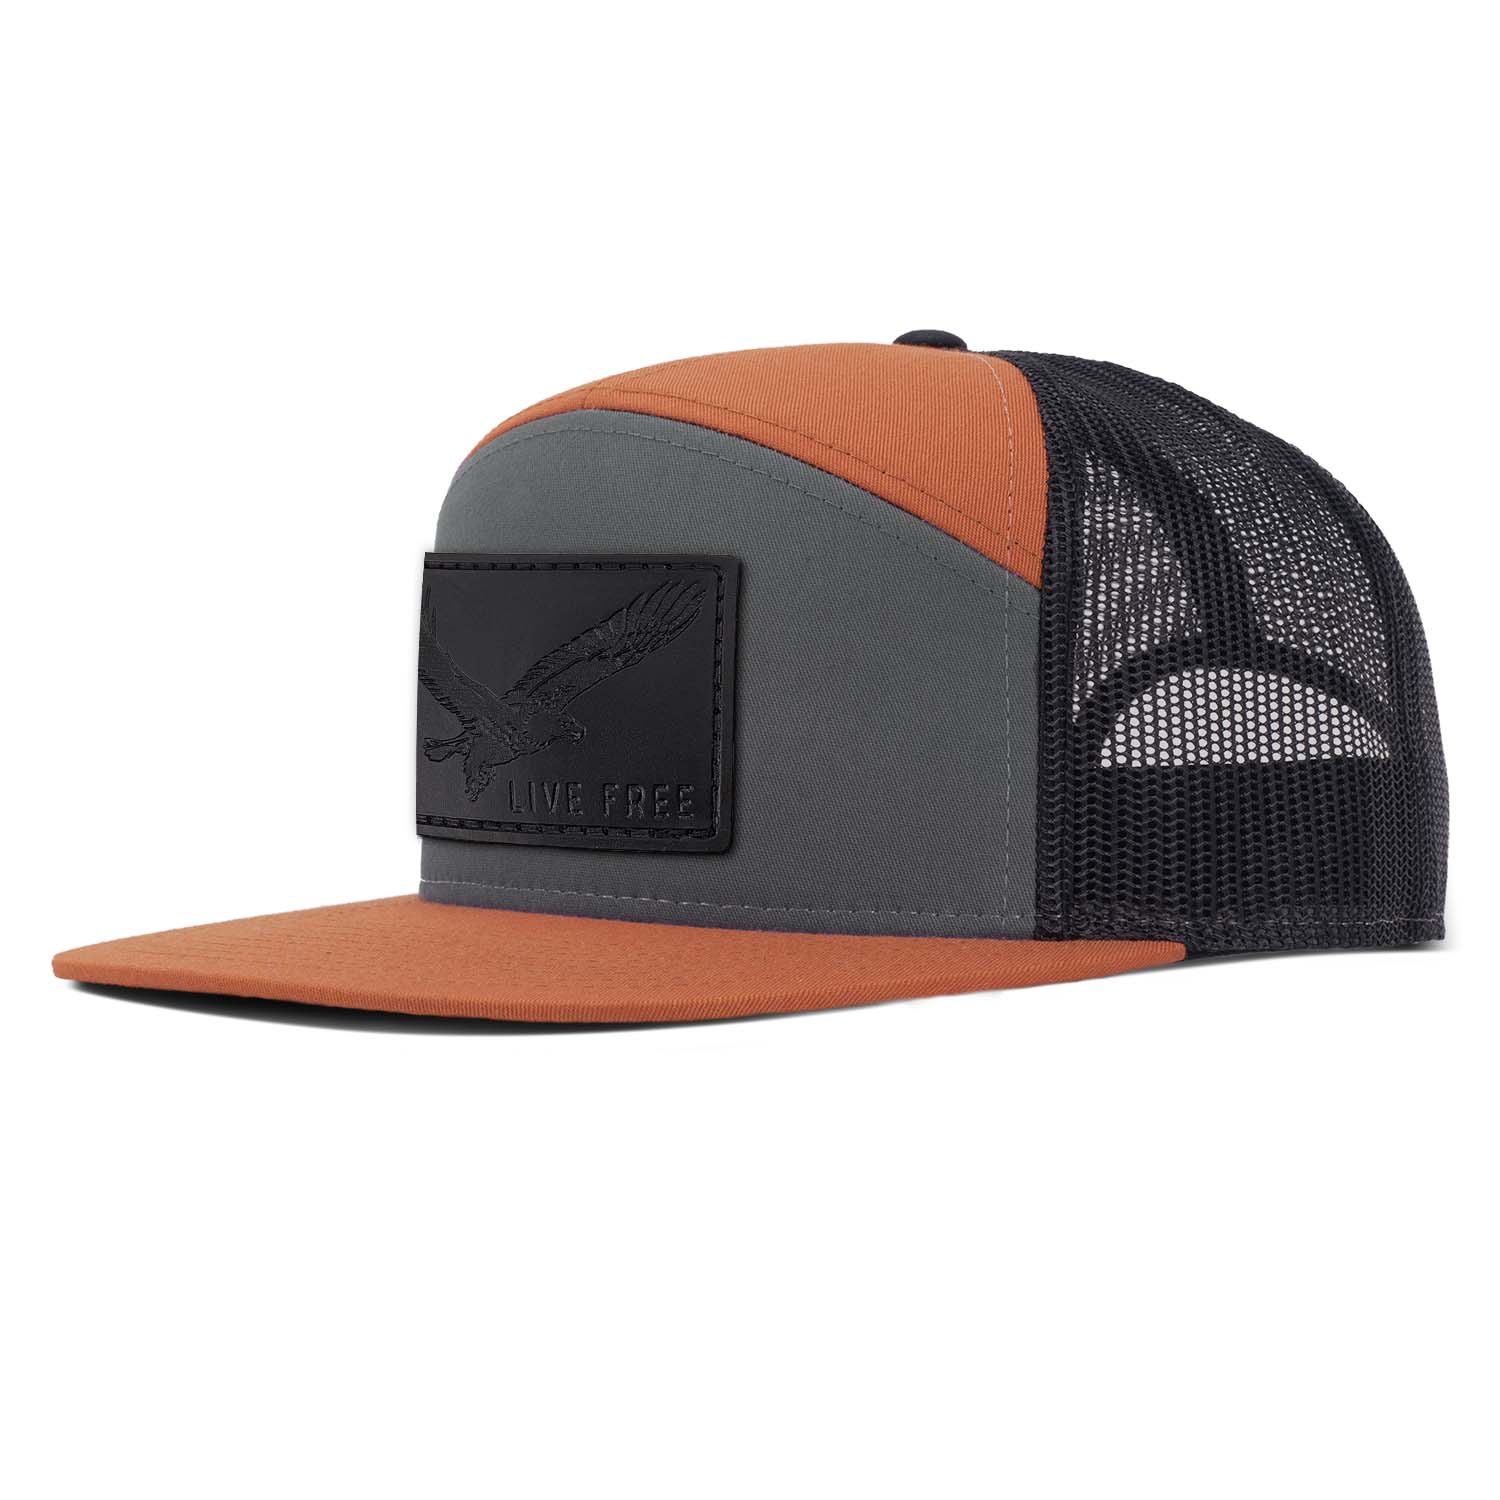 Revolution Mfg charcoal and burnt orange with black mesh 7 panel trucker featuring our full grain leather black Live Free patch on the seamless front panel.